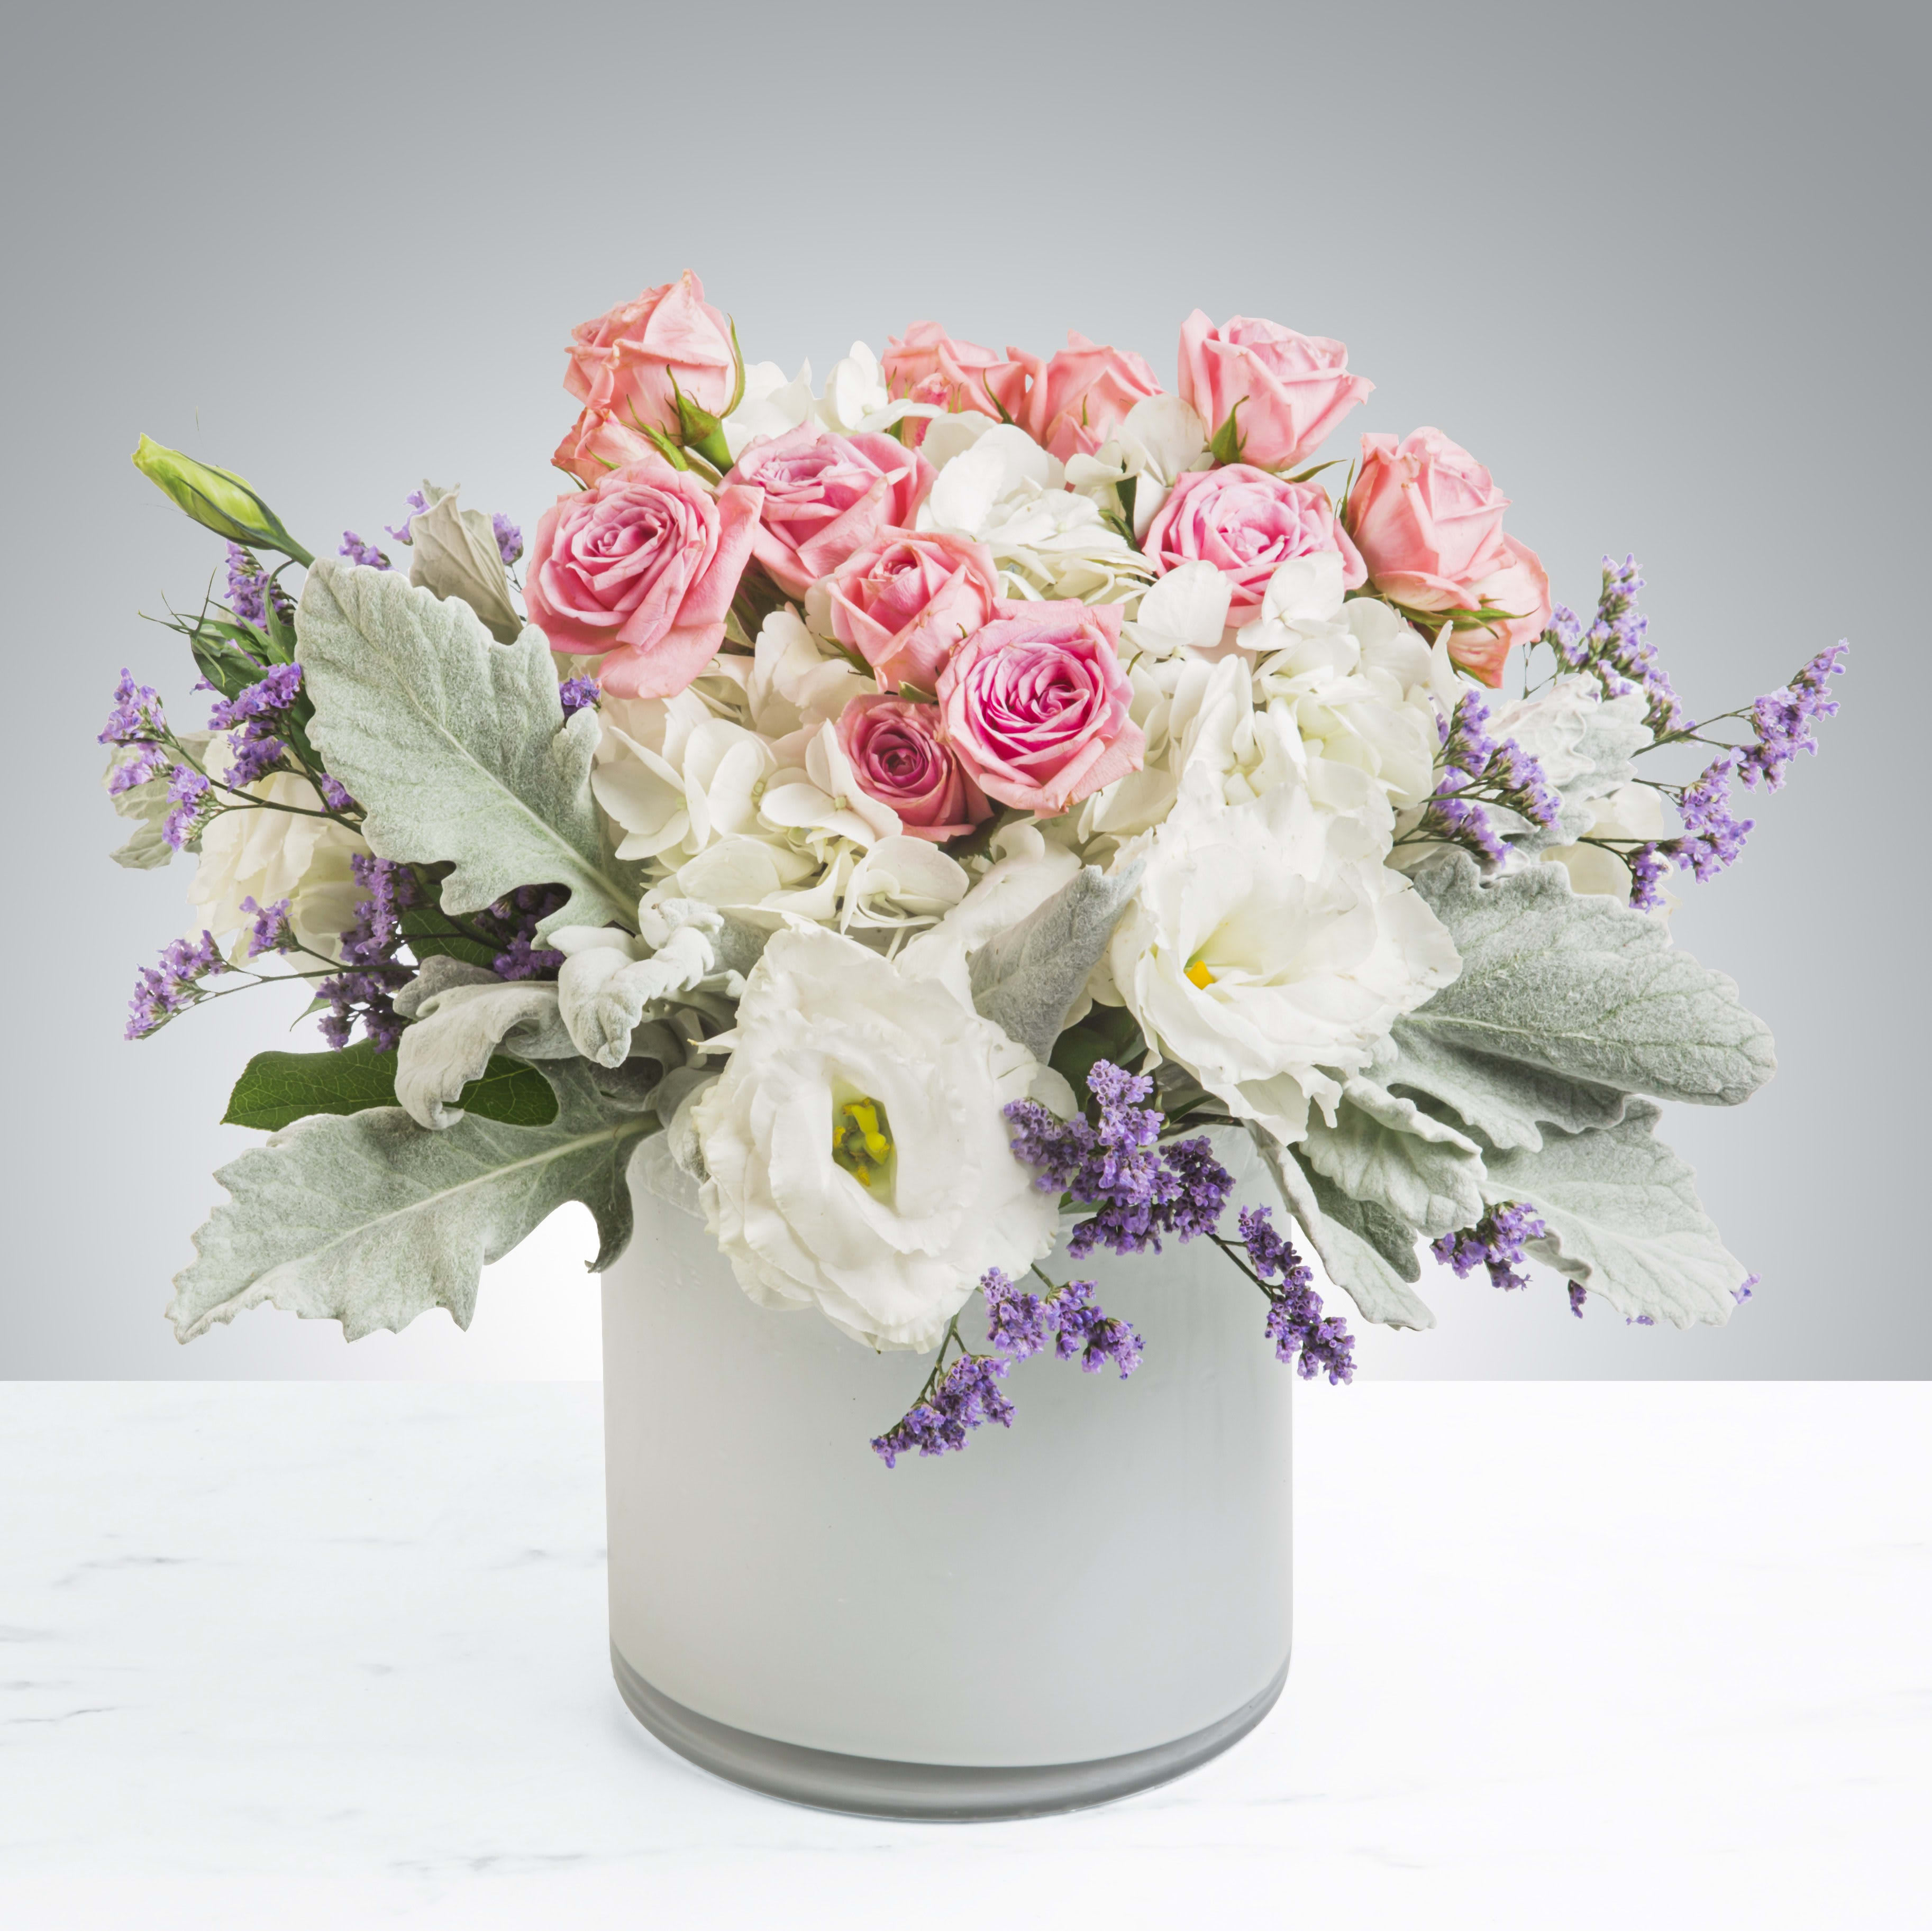 Sweet Cream - This angelic arrangement is as cute as it is pretty. Featuring the soft texture of lambs ear and pastel colors, Sweet Cream is a warm hug and smile. Perfect for welcoming a new baby, a birthday or making somebody's day a little sweeter. 